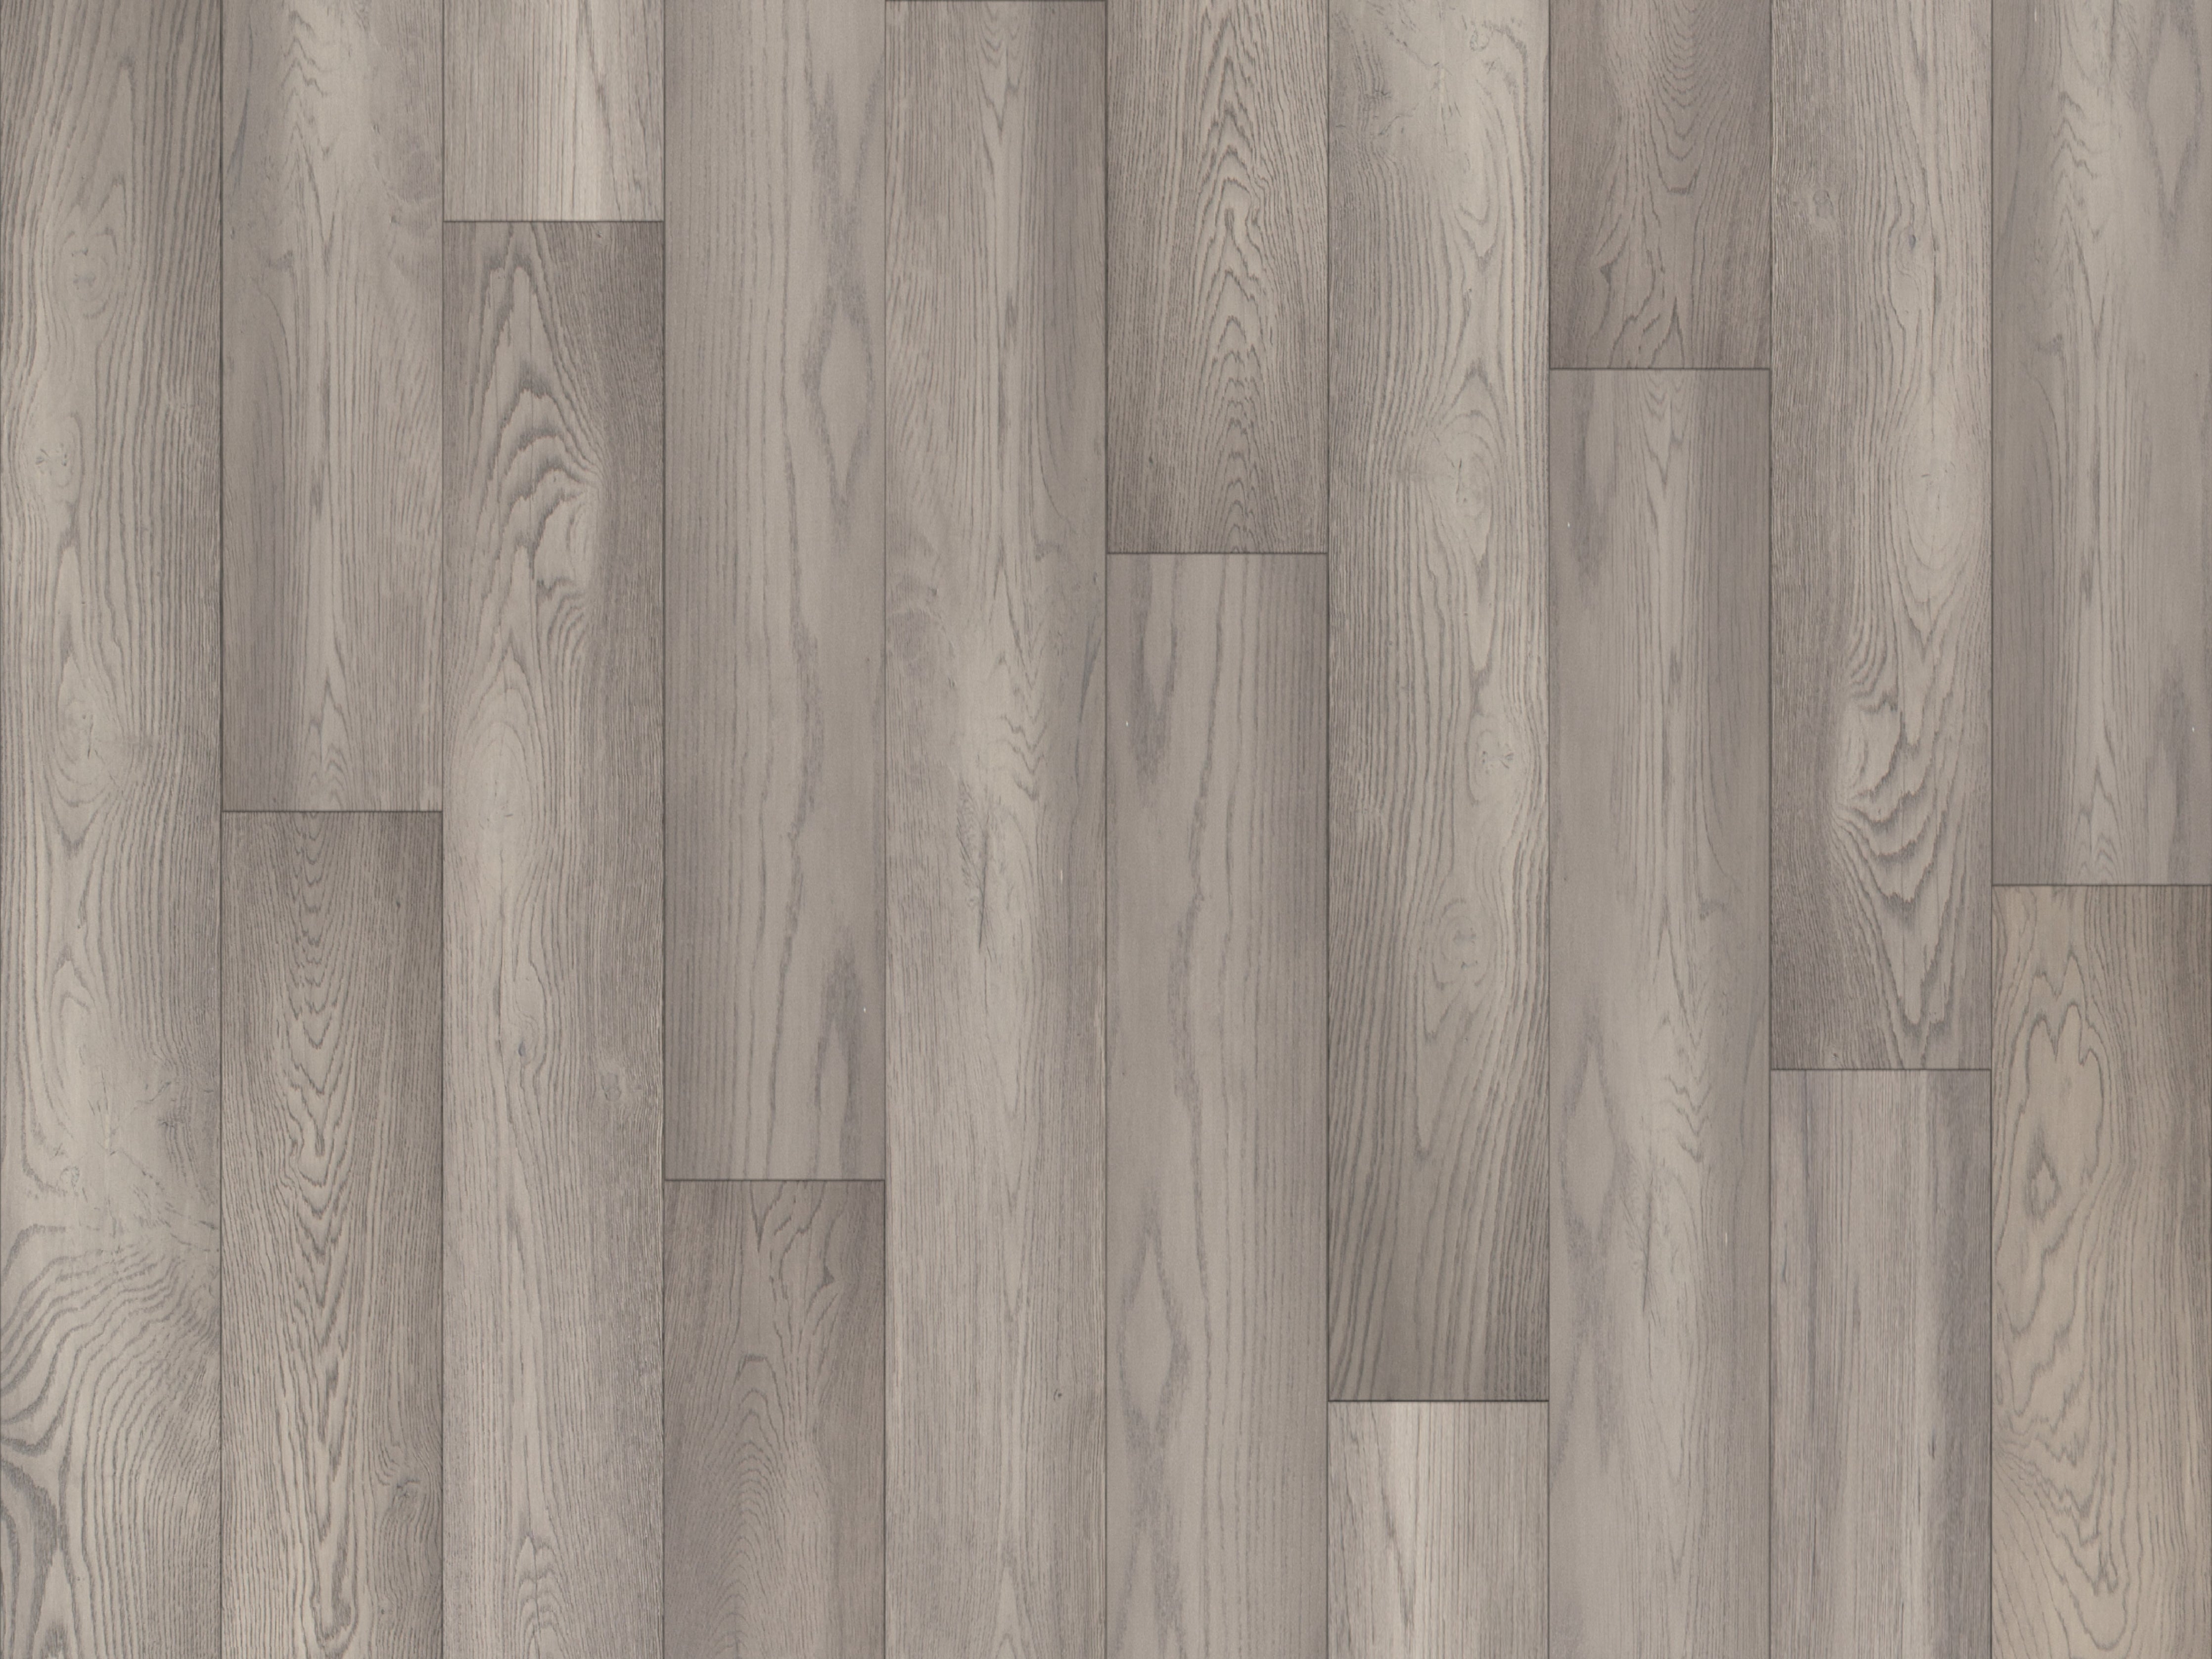 duchateau signature chateau domenico european oak engineered hardnatural wood floor hard wax oil finish for interior use distributed by surface group international